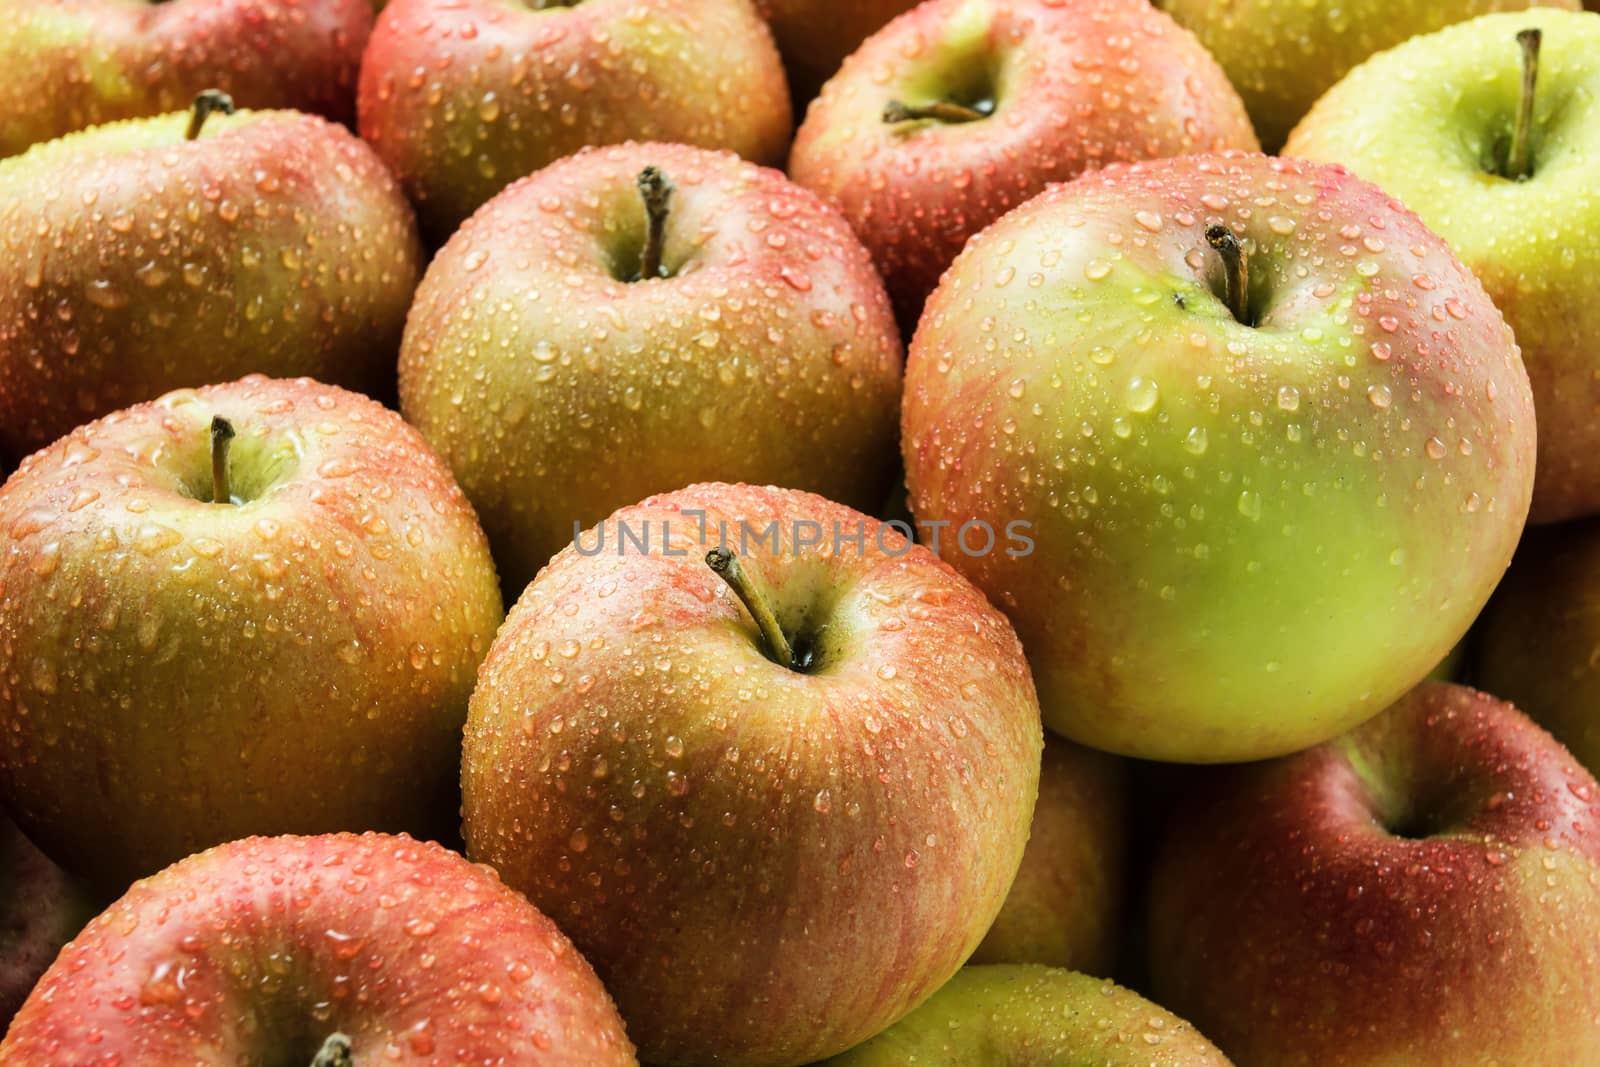 Apples with water drops, food background